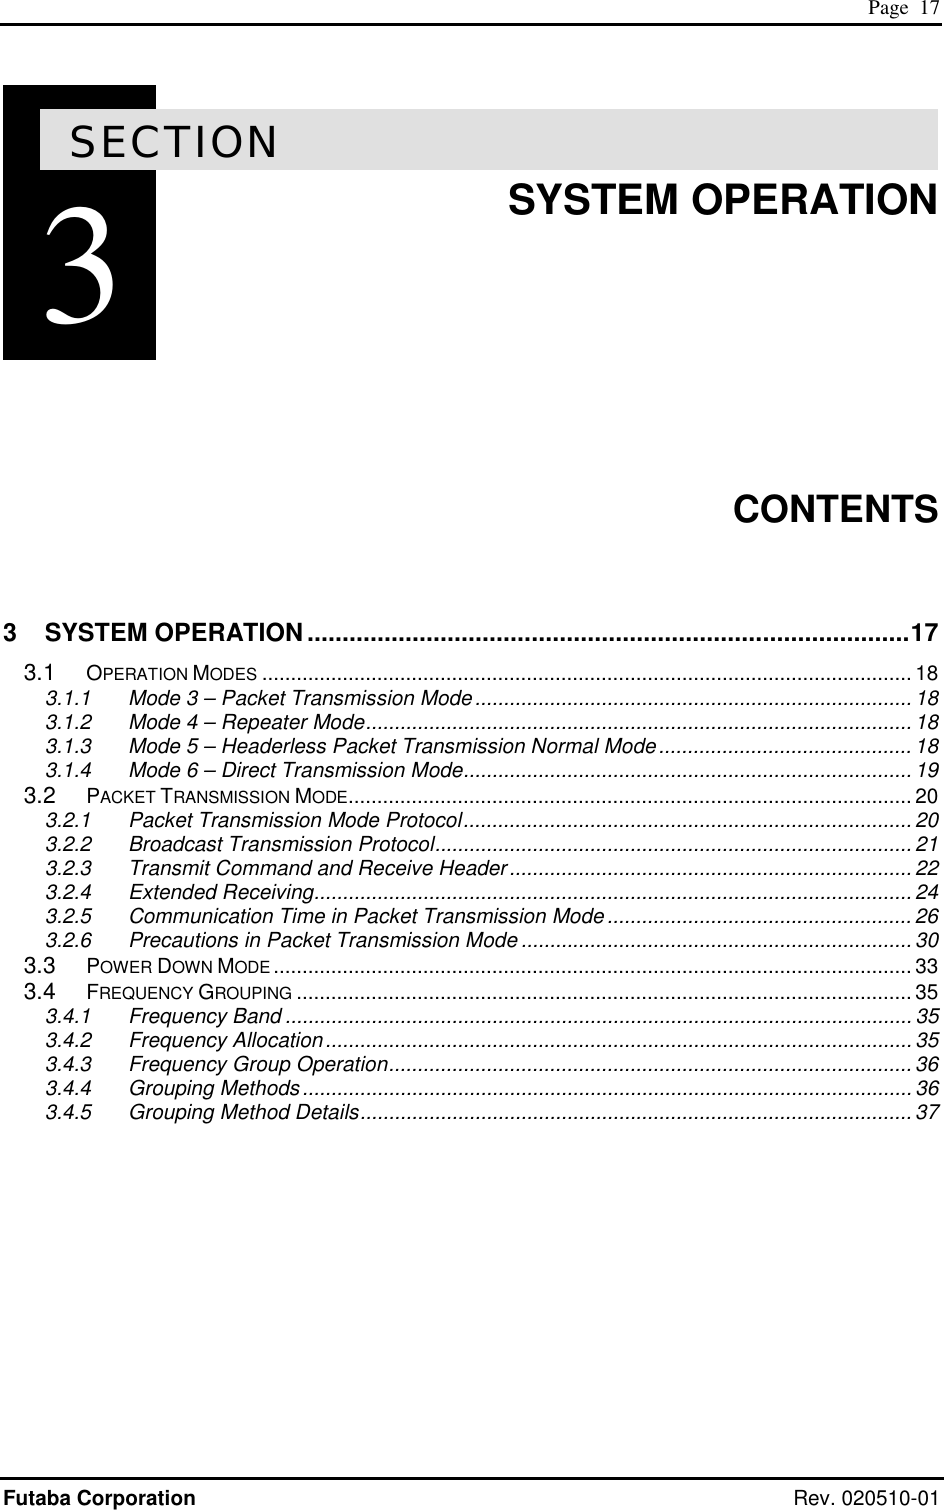  Page  17 Futaba Corporation Rev. 020510-01 3SECTION 3  SYSTEM OPERATION        CONTENTS  3 SYSTEM OPERATION ......................................................................................17 3.1 OPERATION MODES ................................................................................................................. 18 3.1.1 Mode 3 – Packet Transmission Mode............................................................................18 3.1.2 Mode 4 – Repeater Mode............................................................................................... 18 3.1.3 Mode 5 – Headerless Packet Transmission Normal Mode............................................18 3.1.4 Mode 6 – Direct Transmission Mode.............................................................................. 19 3.2 PACKET TRANSMISSION MODE.................................................................................................. 20 3.2.1 Packet Transmission Mode Protocol.............................................................................. 20 3.2.2 Broadcast Transmission Protocol................................................................................... 21 3.2.3 Transmit Command and Receive Header...................................................................... 22 3.2.4 Extended Receiving........................................................................................................ 24 3.2.5 Communication Time in Packet Transmission Mode ..................................................... 26 3.2.6 Precautions in Packet Transmission Mode ....................................................................30 3.3 POWER DOWN MODE ............................................................................................................... 33 3.4 FREQUENCY GROUPING ........................................................................................................... 35 3.4.1 Frequency Band ............................................................................................................. 35 3.4.2 Frequency Allocation......................................................................................................35 3.4.3 Frequency Group Operation........................................................................................... 36 3.4.4 Grouping Methods..........................................................................................................36 3.4.5 Grouping Method Details................................................................................................ 37   